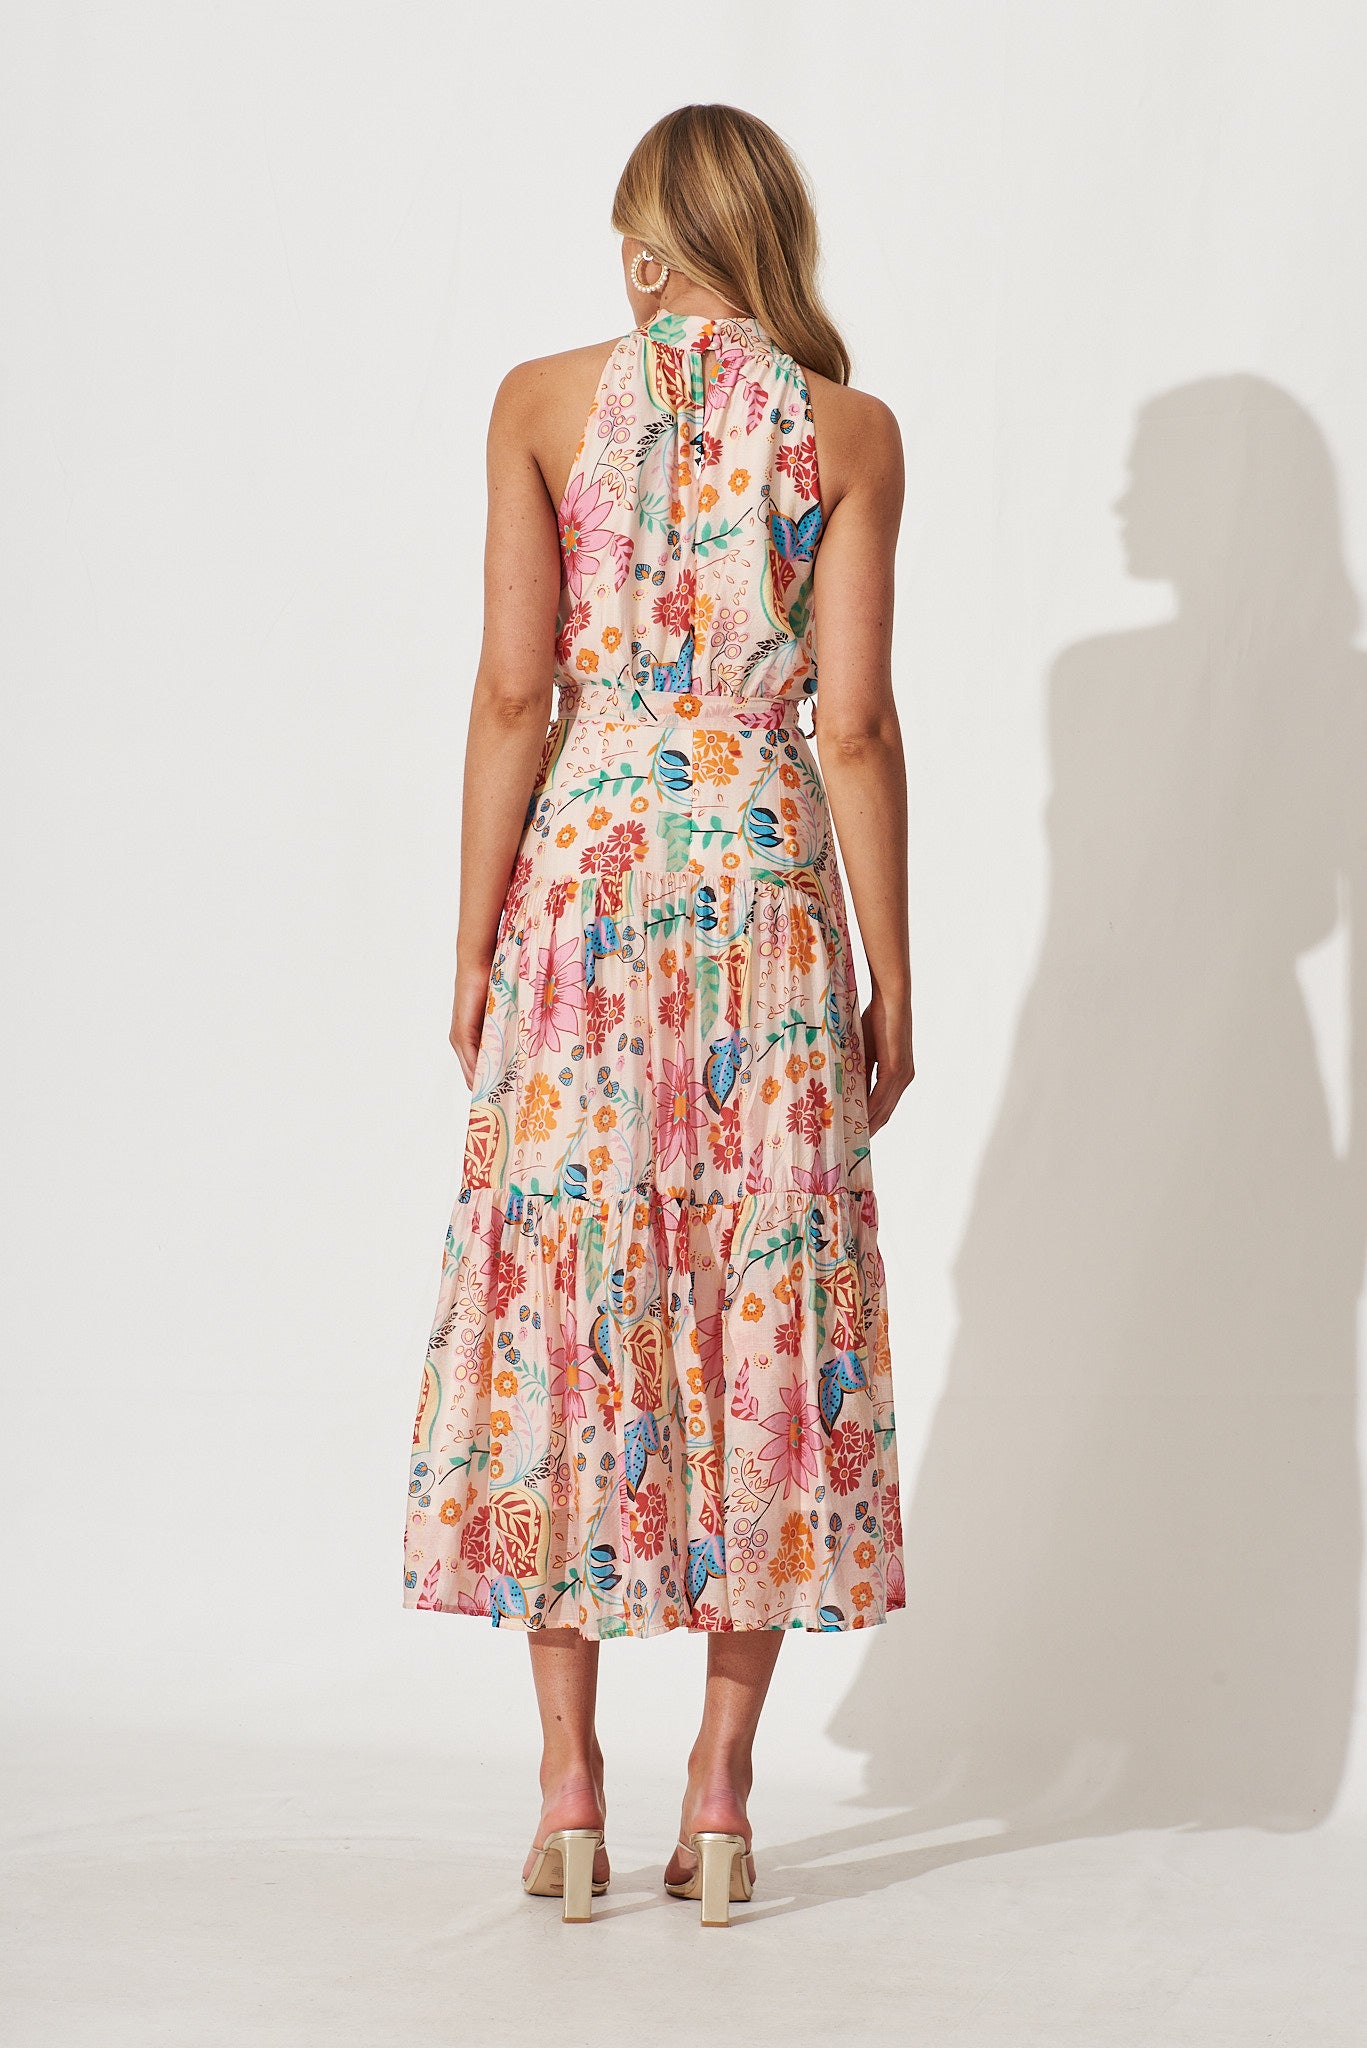 Khalo Dress In Bright Multi Floral Print – St Frock